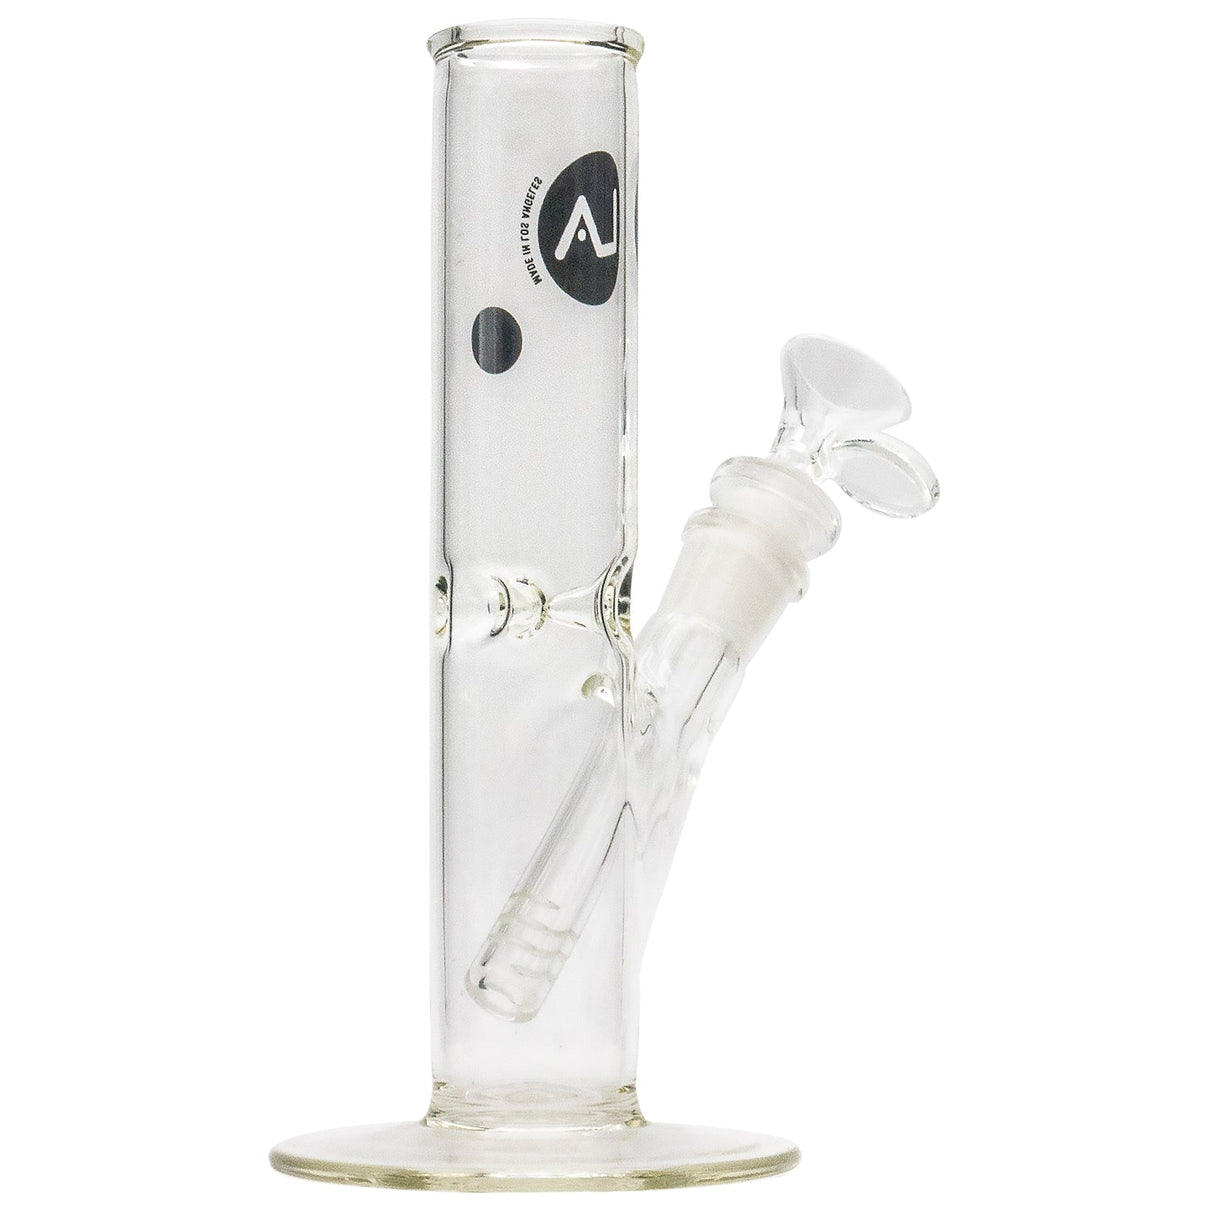 LA Pipes 8" Straight Bong with Ice Pinch, Clear Borosilicate Glass, Front View